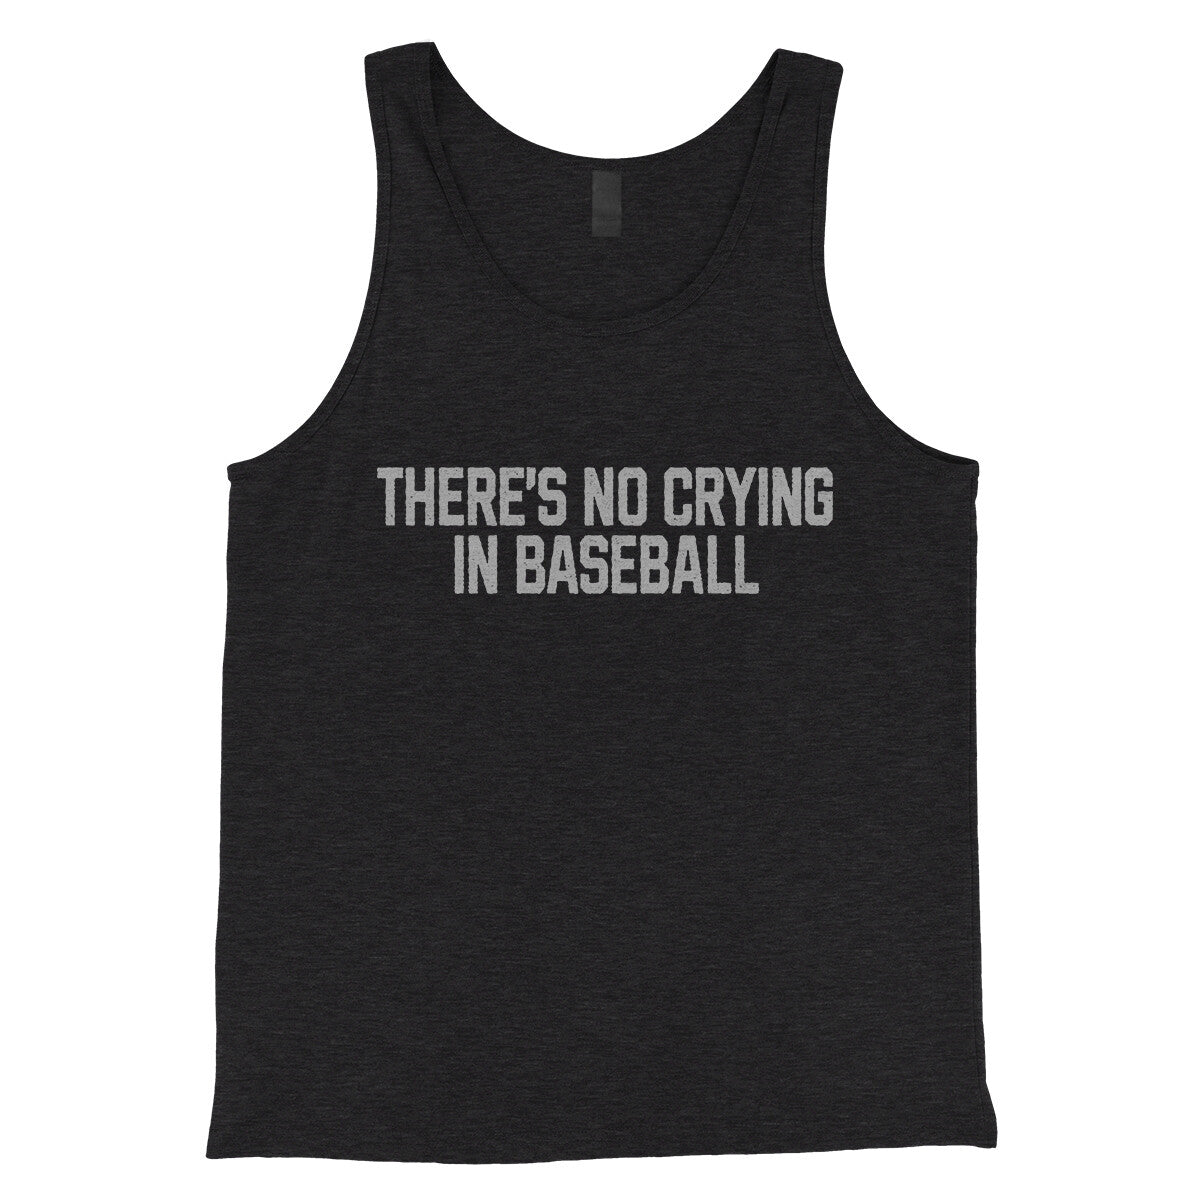 There's No Crying in Baseball in Charcoal Black TriBlend Color